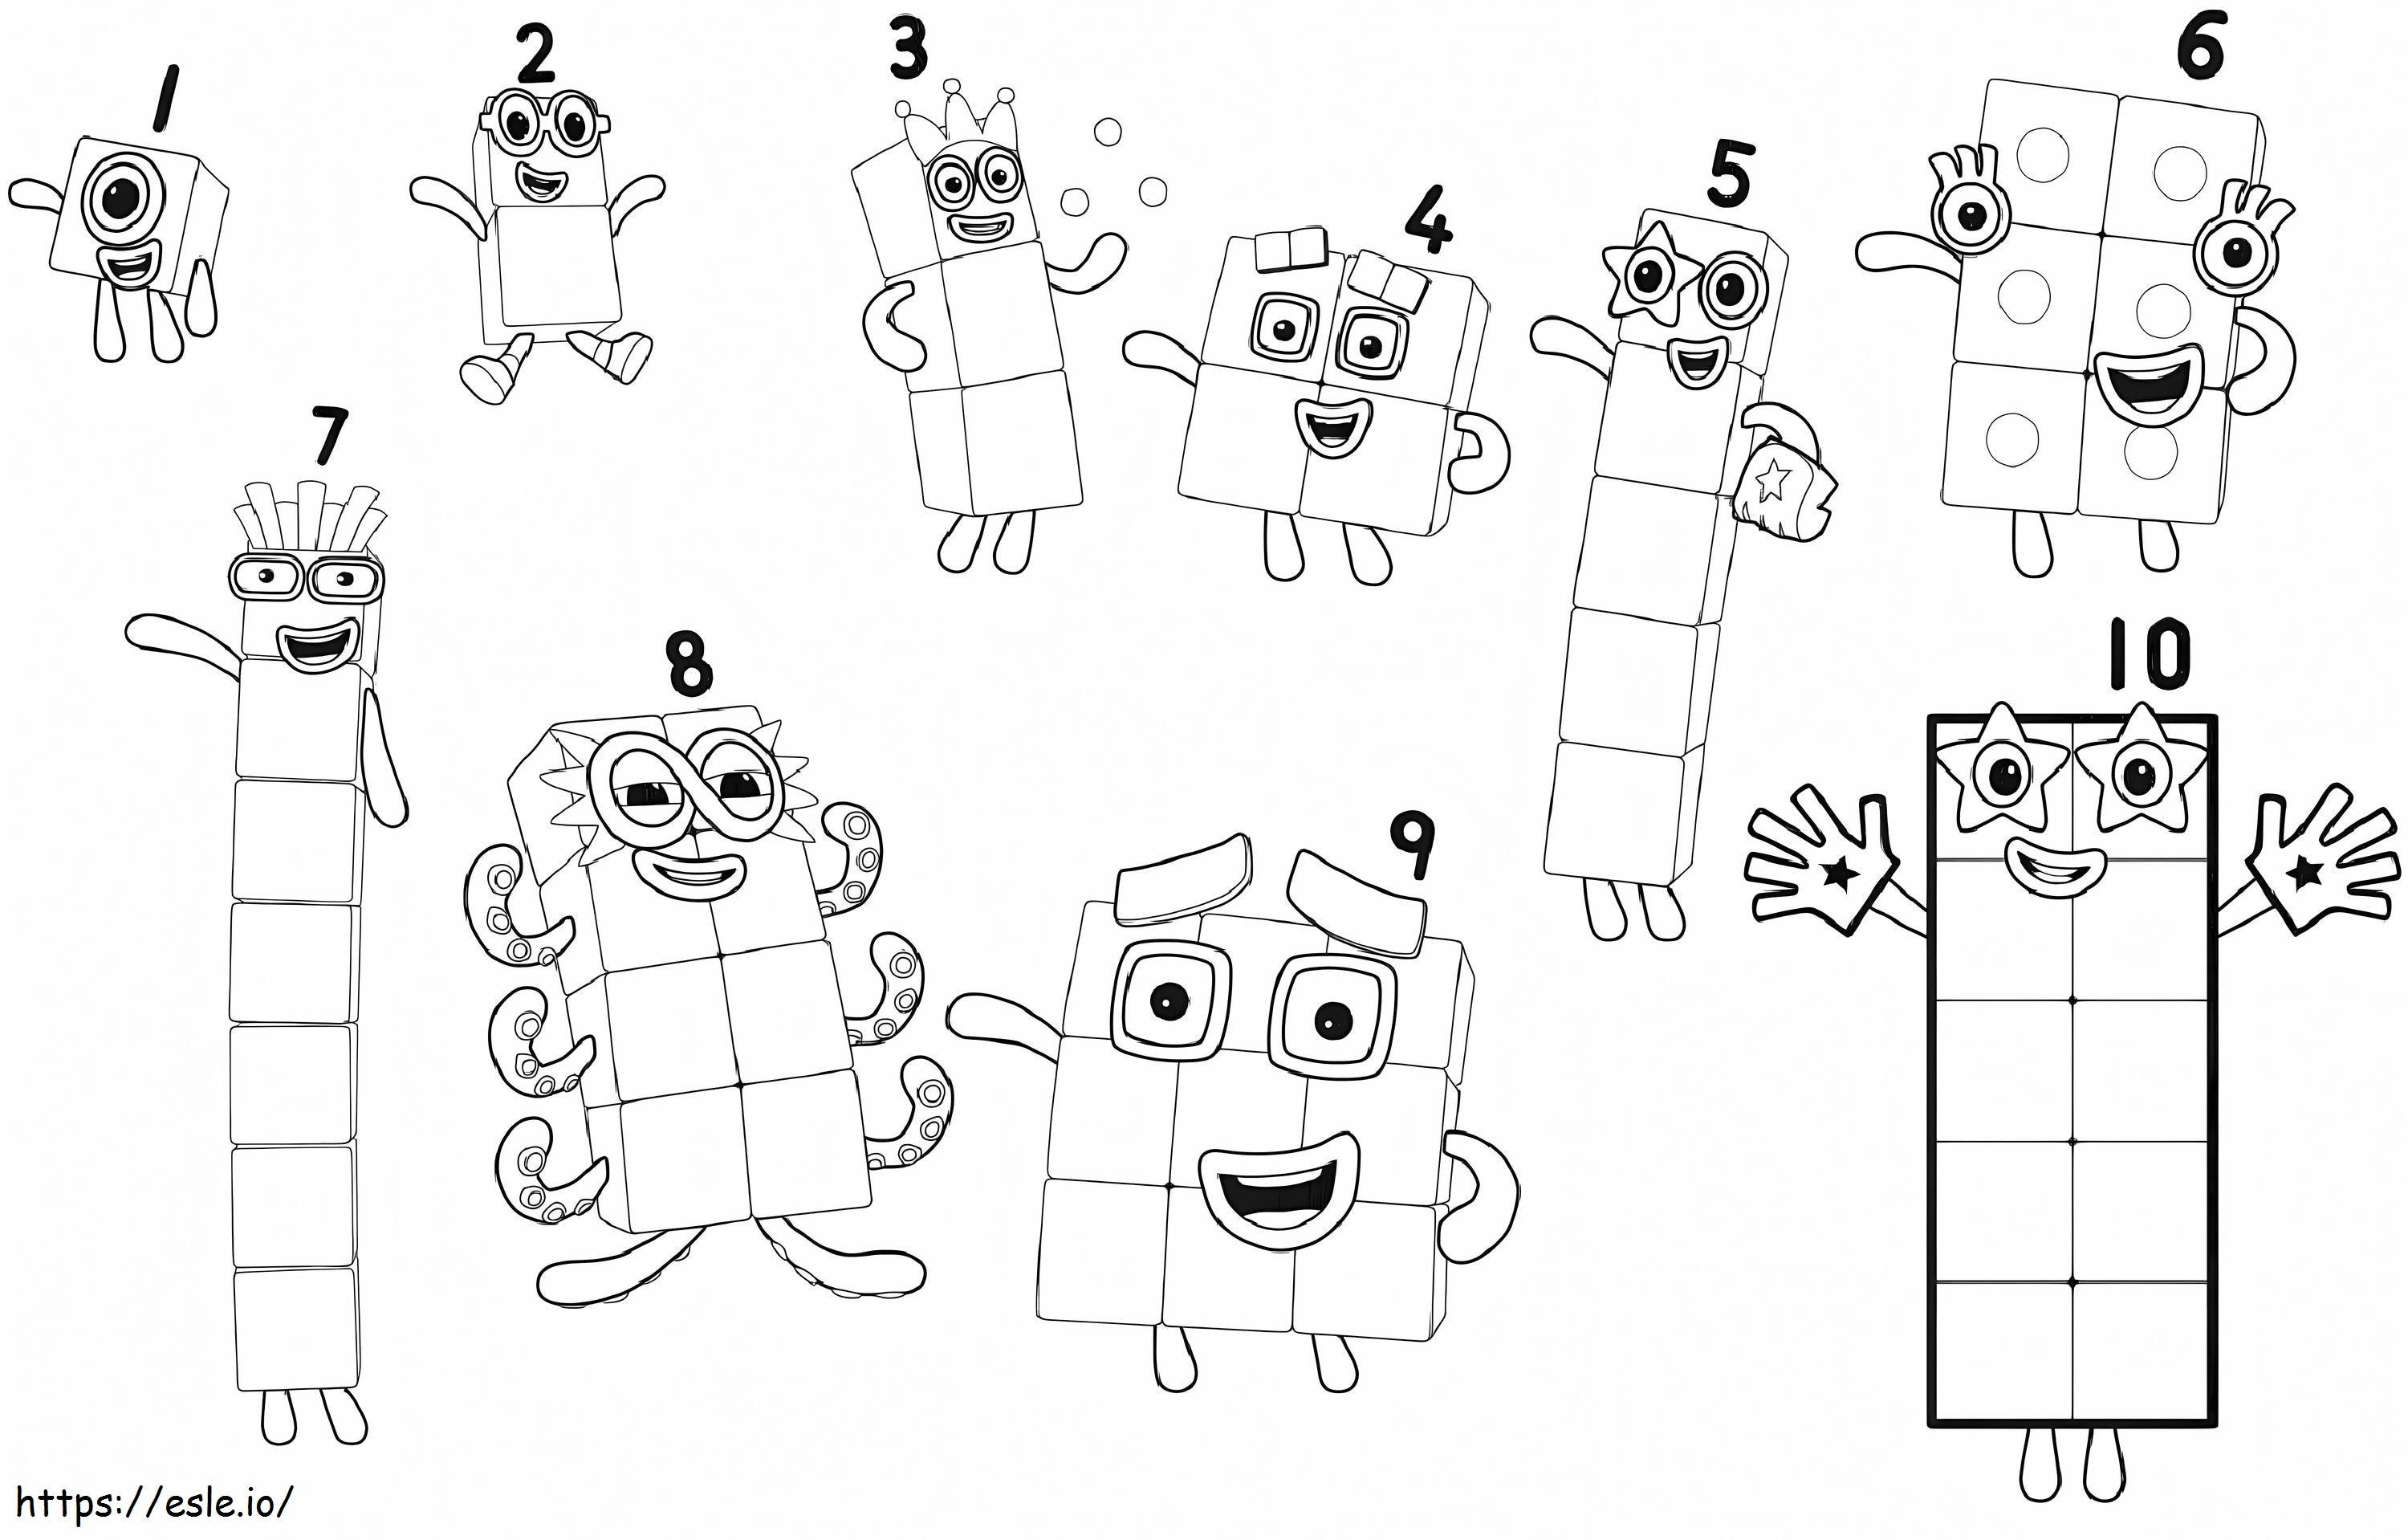 All Numberblocks coloring page